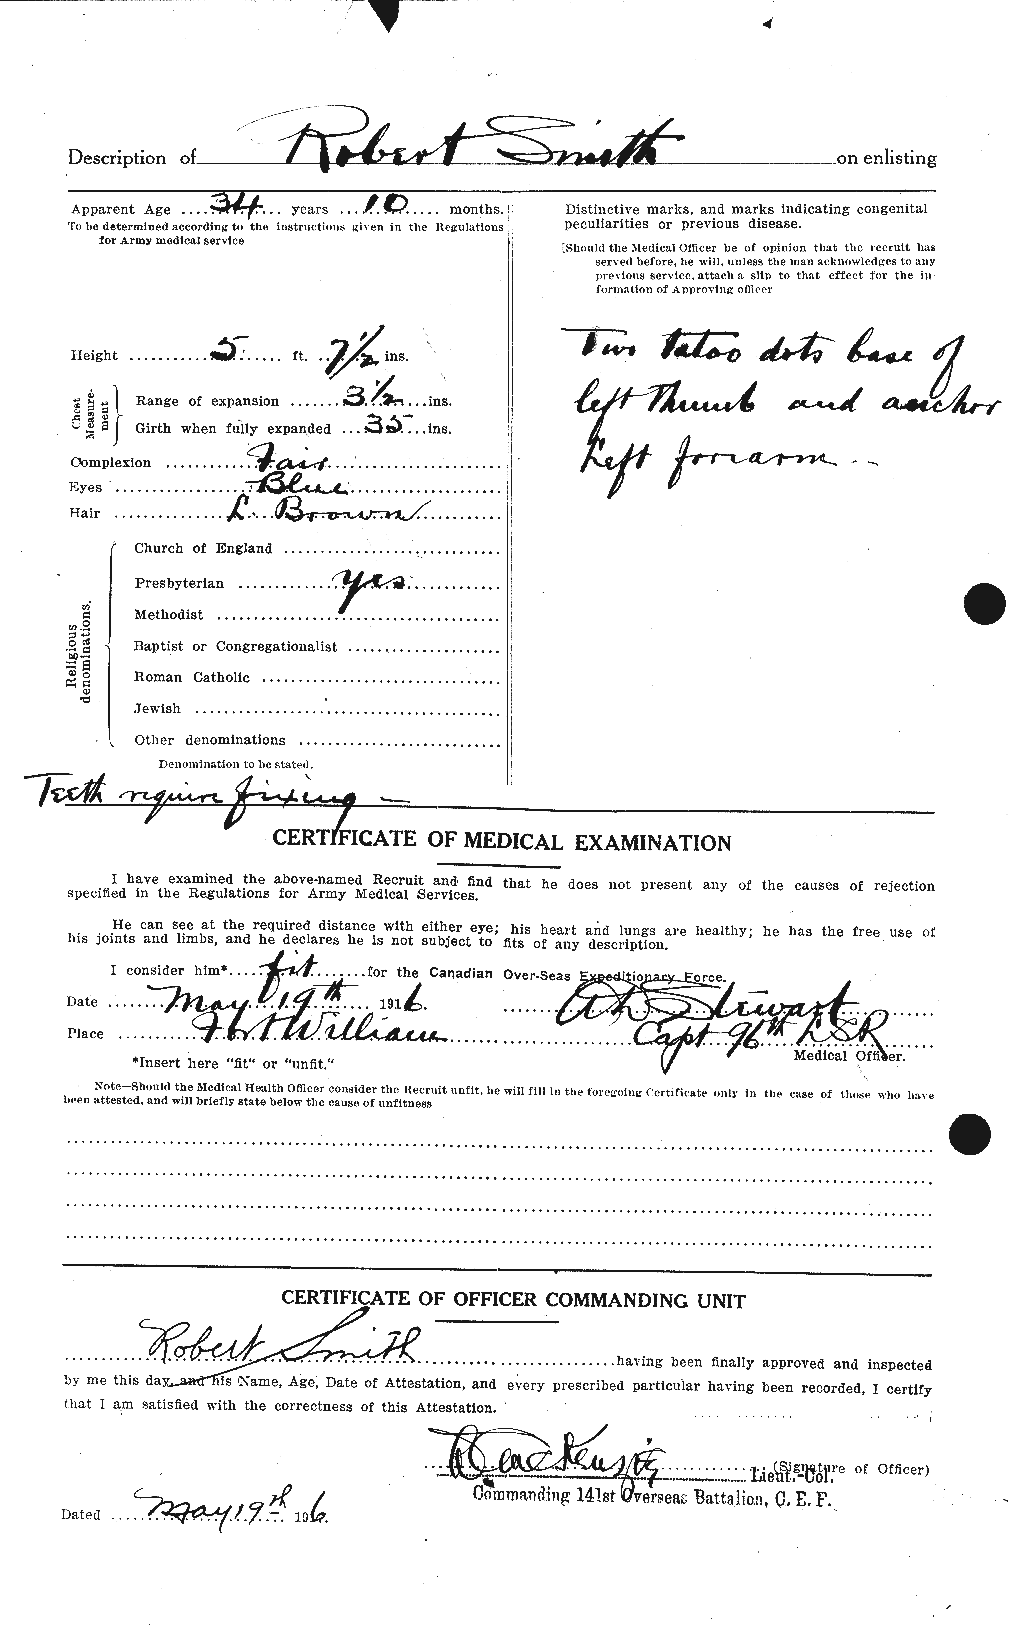 Personnel Records of the First World War - CEF 110252b